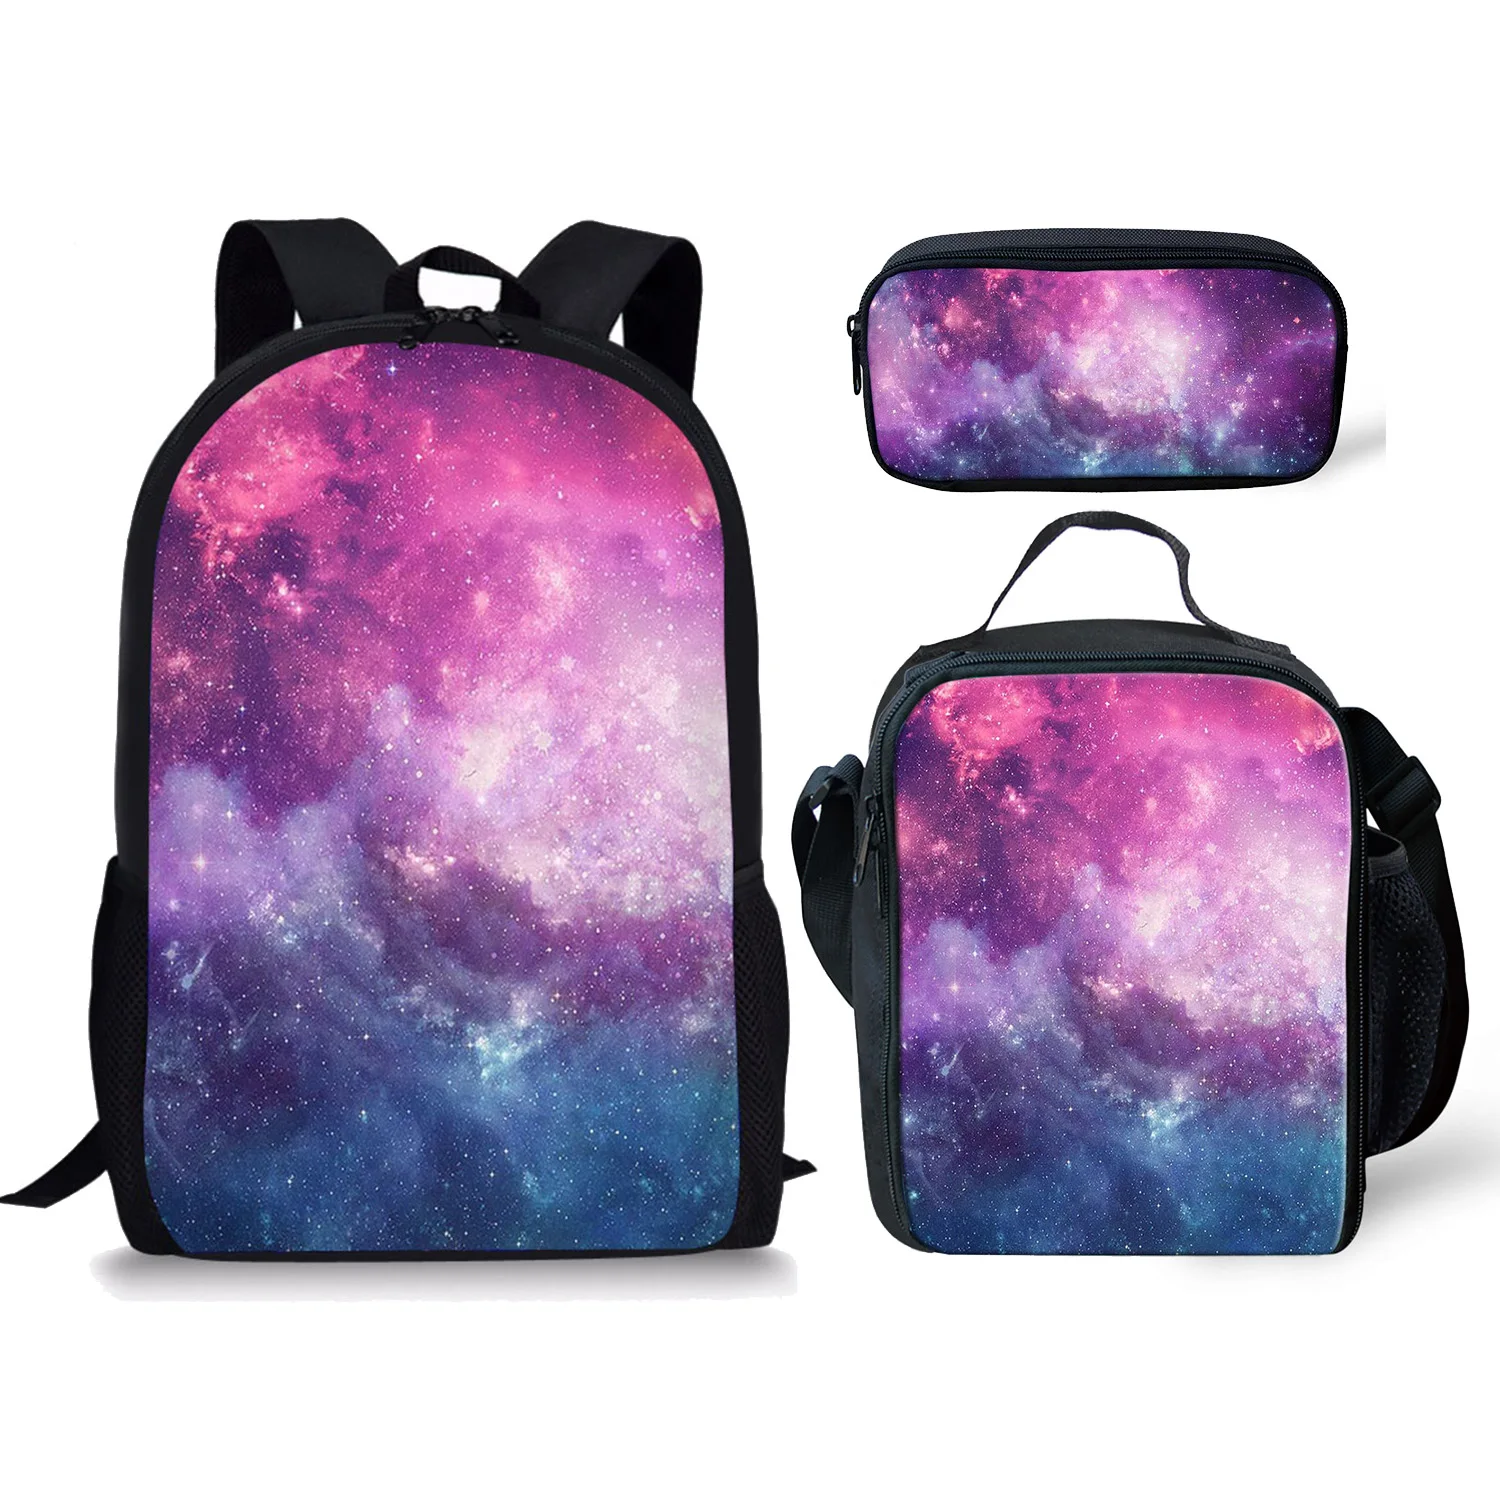 

Starry Sky Pattern 3pcs School Bags Girls Lunch Food & Pen Cases Students Satchel Set Classical Women's Backpack Free Shipping